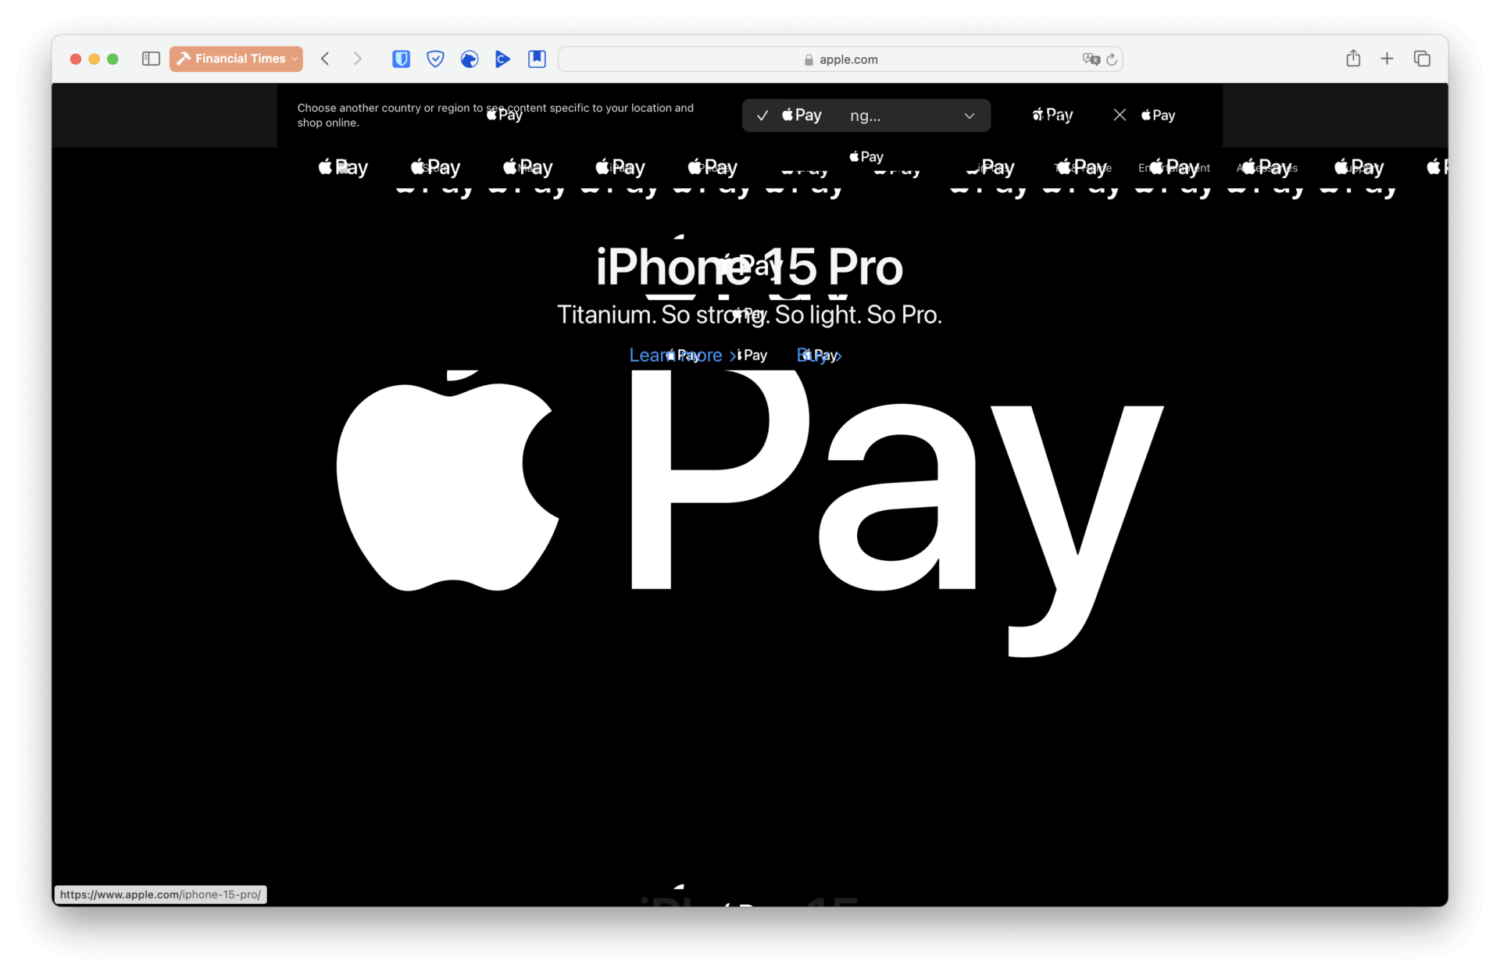 apple.com but every dom element is the apple pay icon, which is the apple icon
followed by the word "Pay"